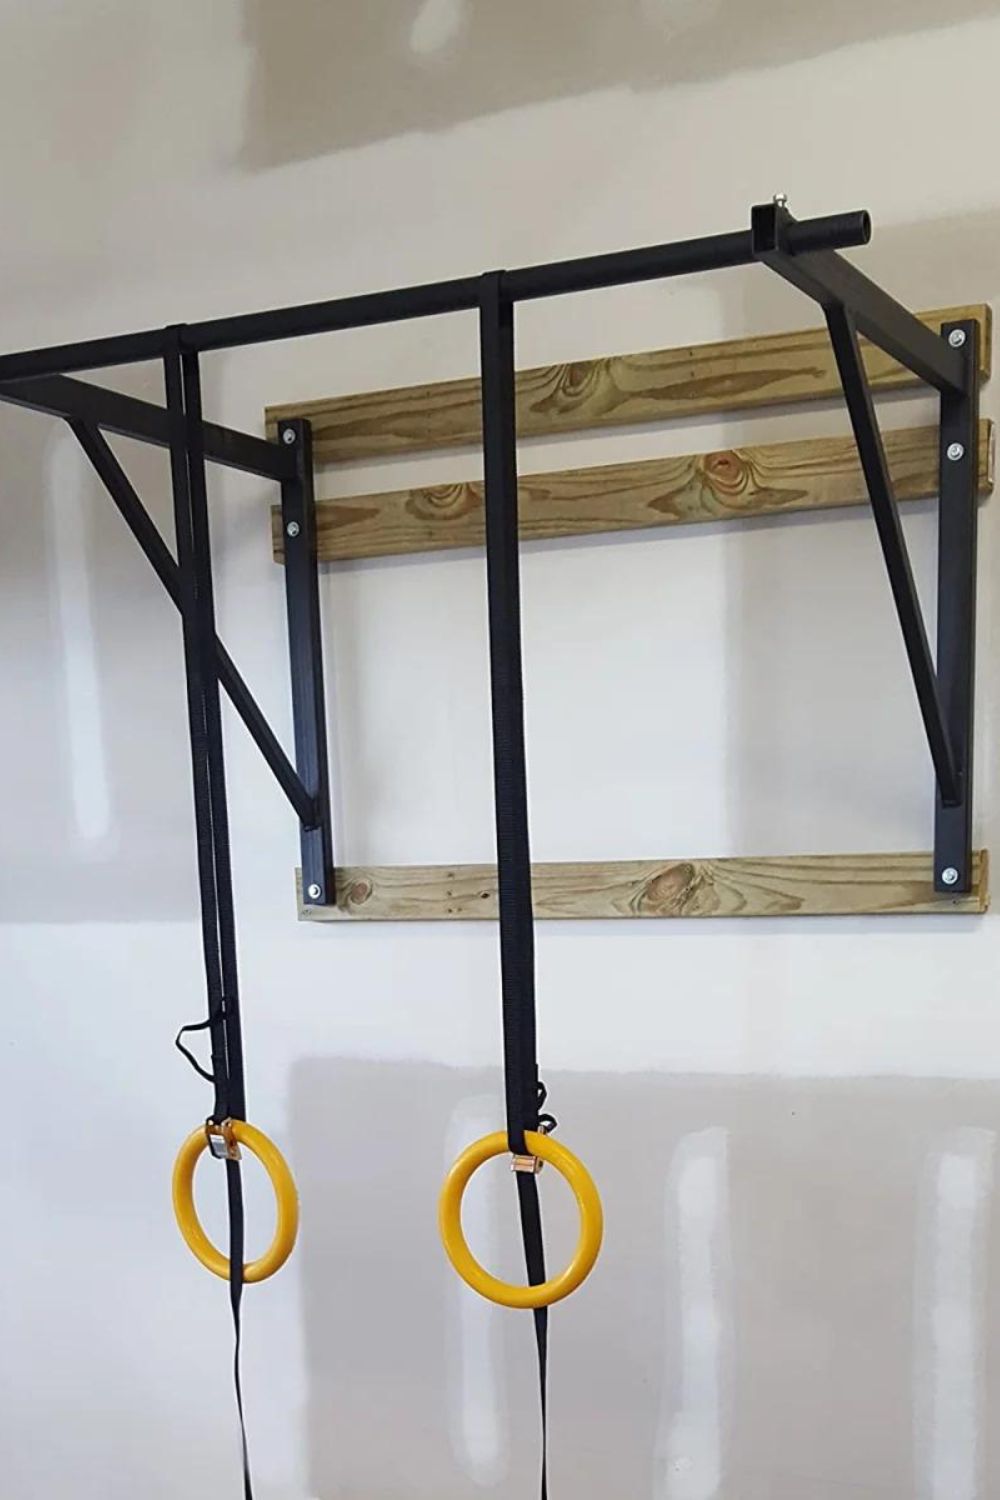 Wall-mount pull-up bar